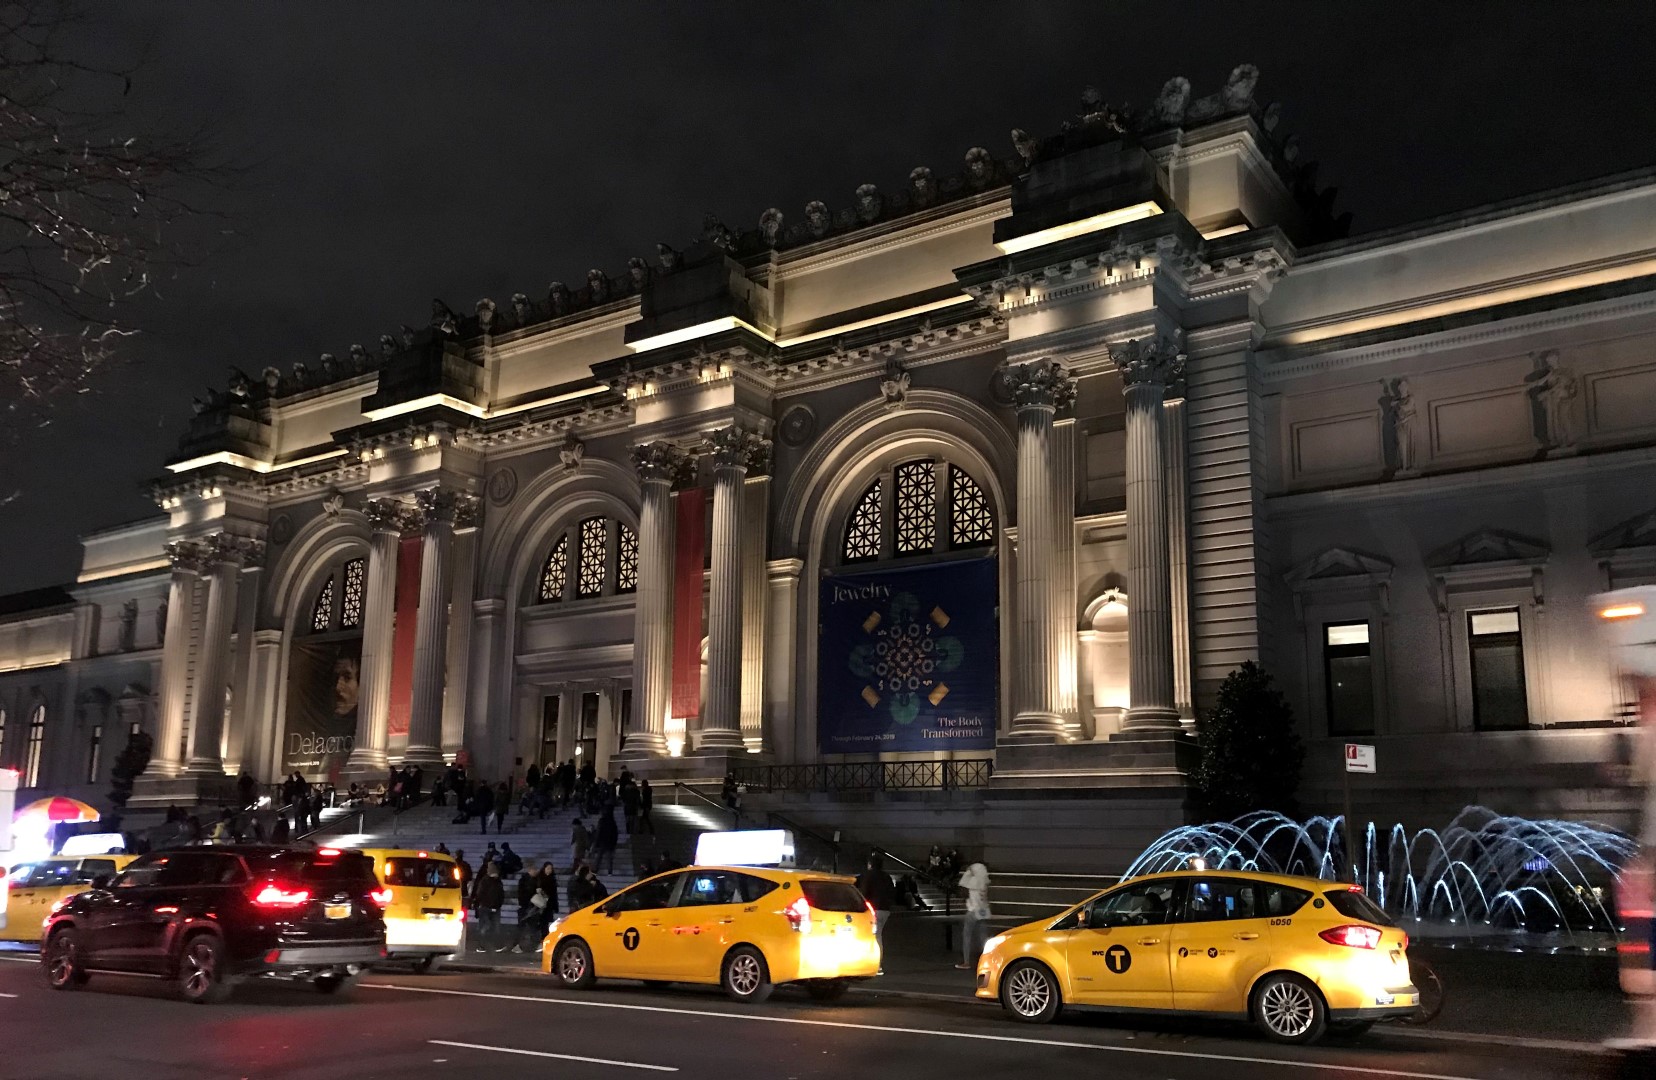 places to visit near new york penn station